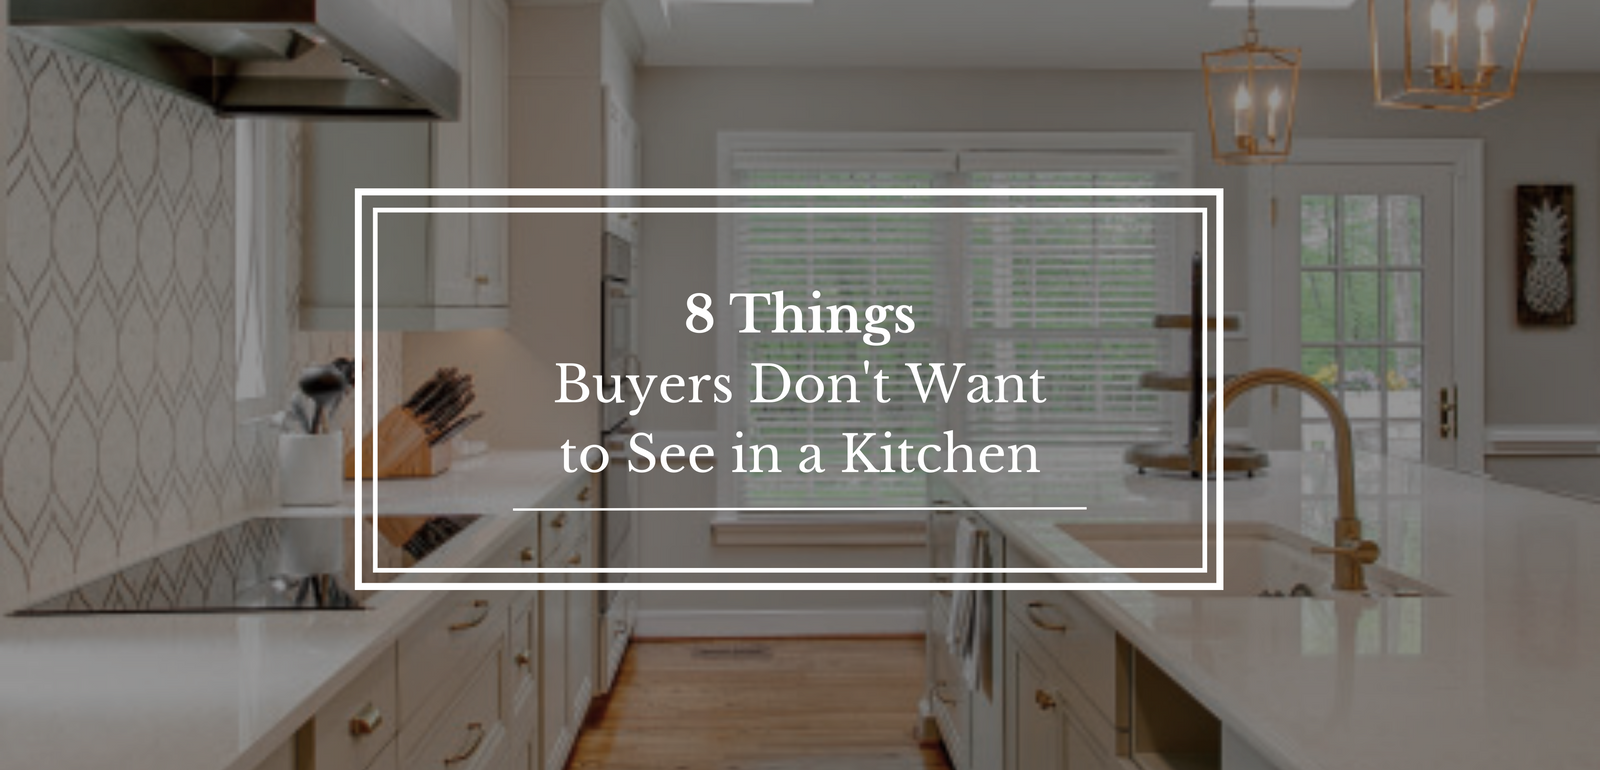 8 Things Buyers Don't Want to See in a Kitchen